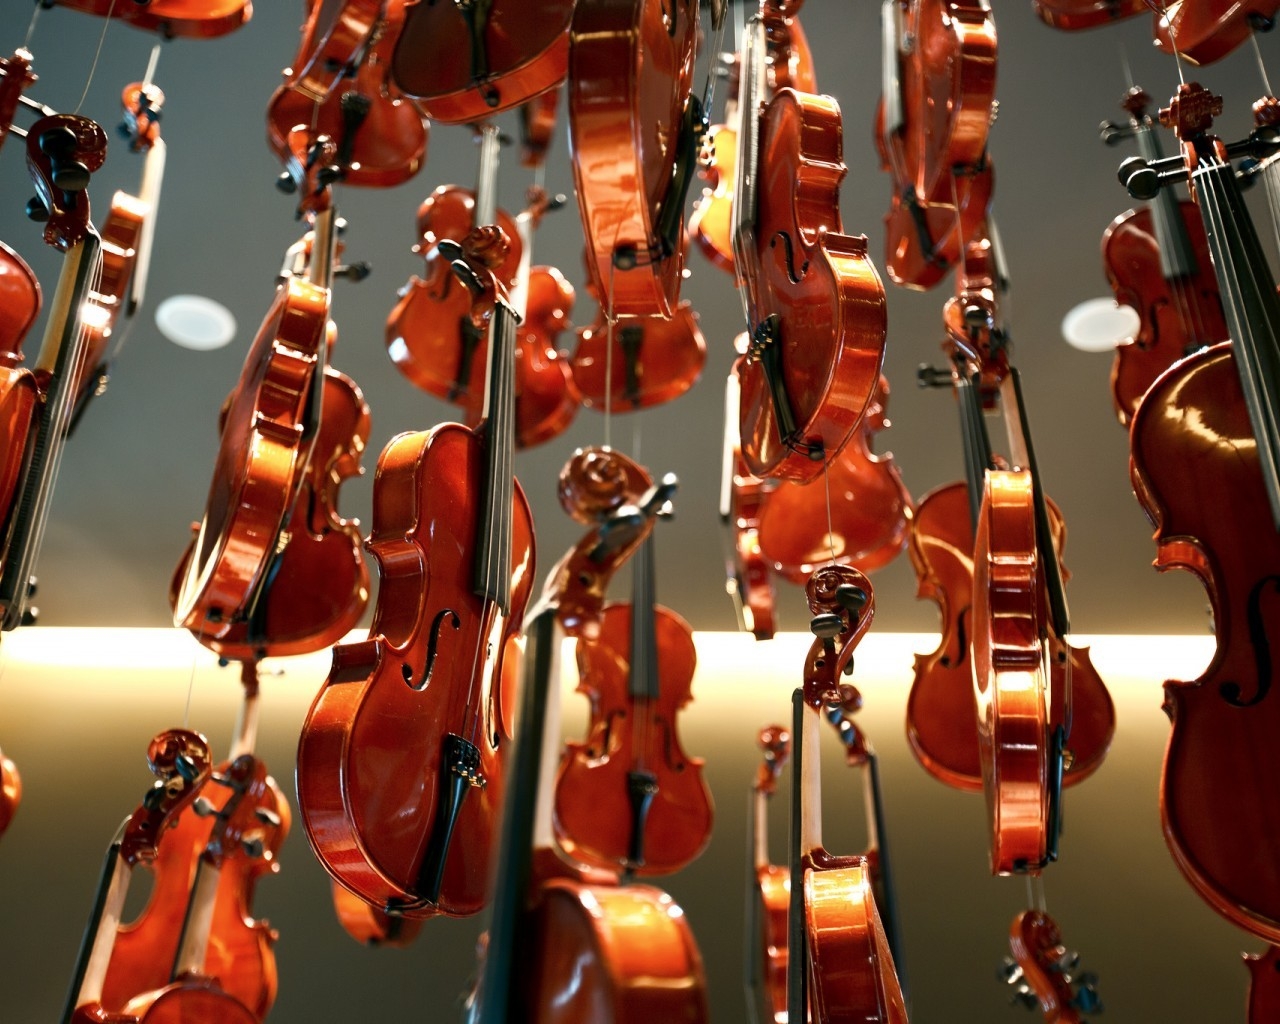 New Violins for 1280 x 1024 resolution